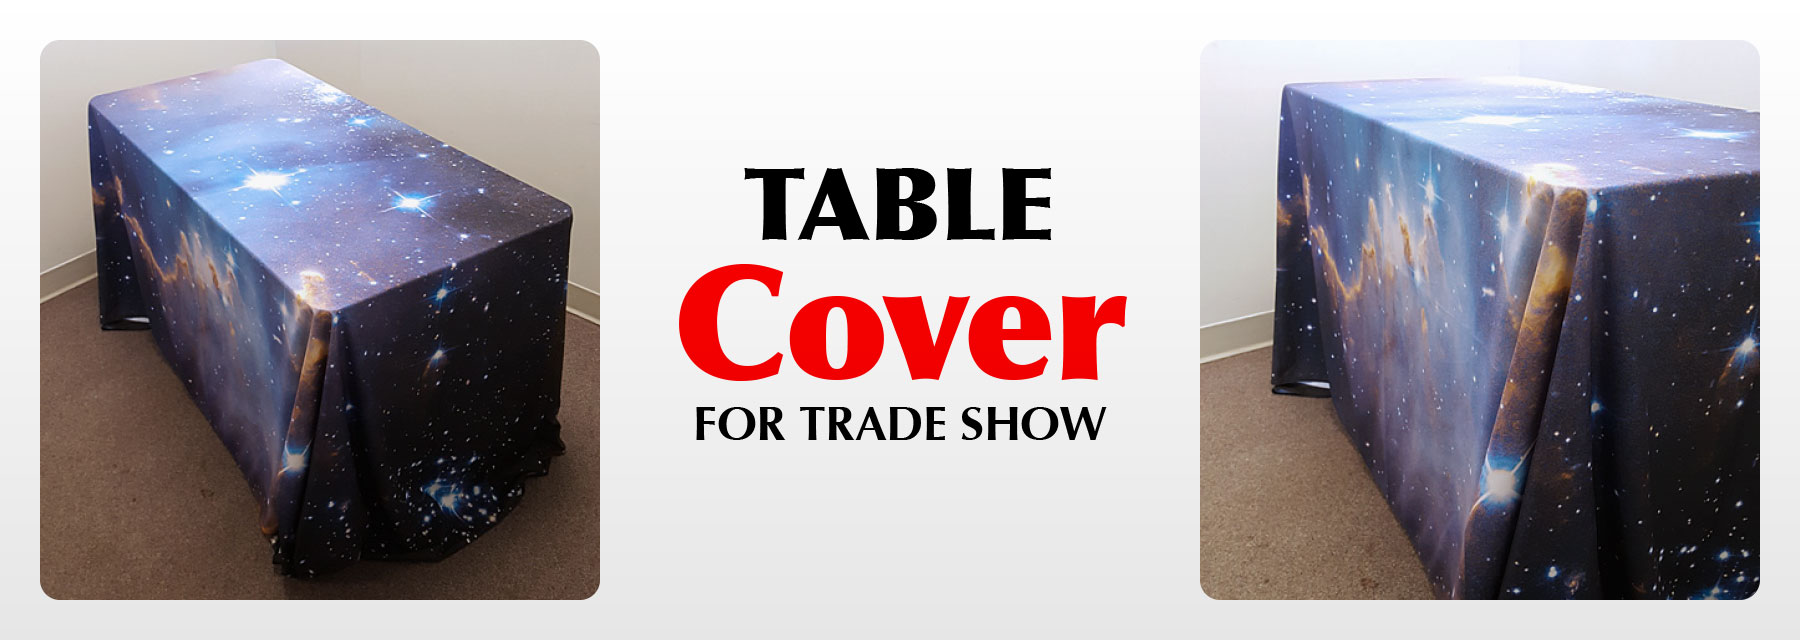 Custom trade show table cover with logo